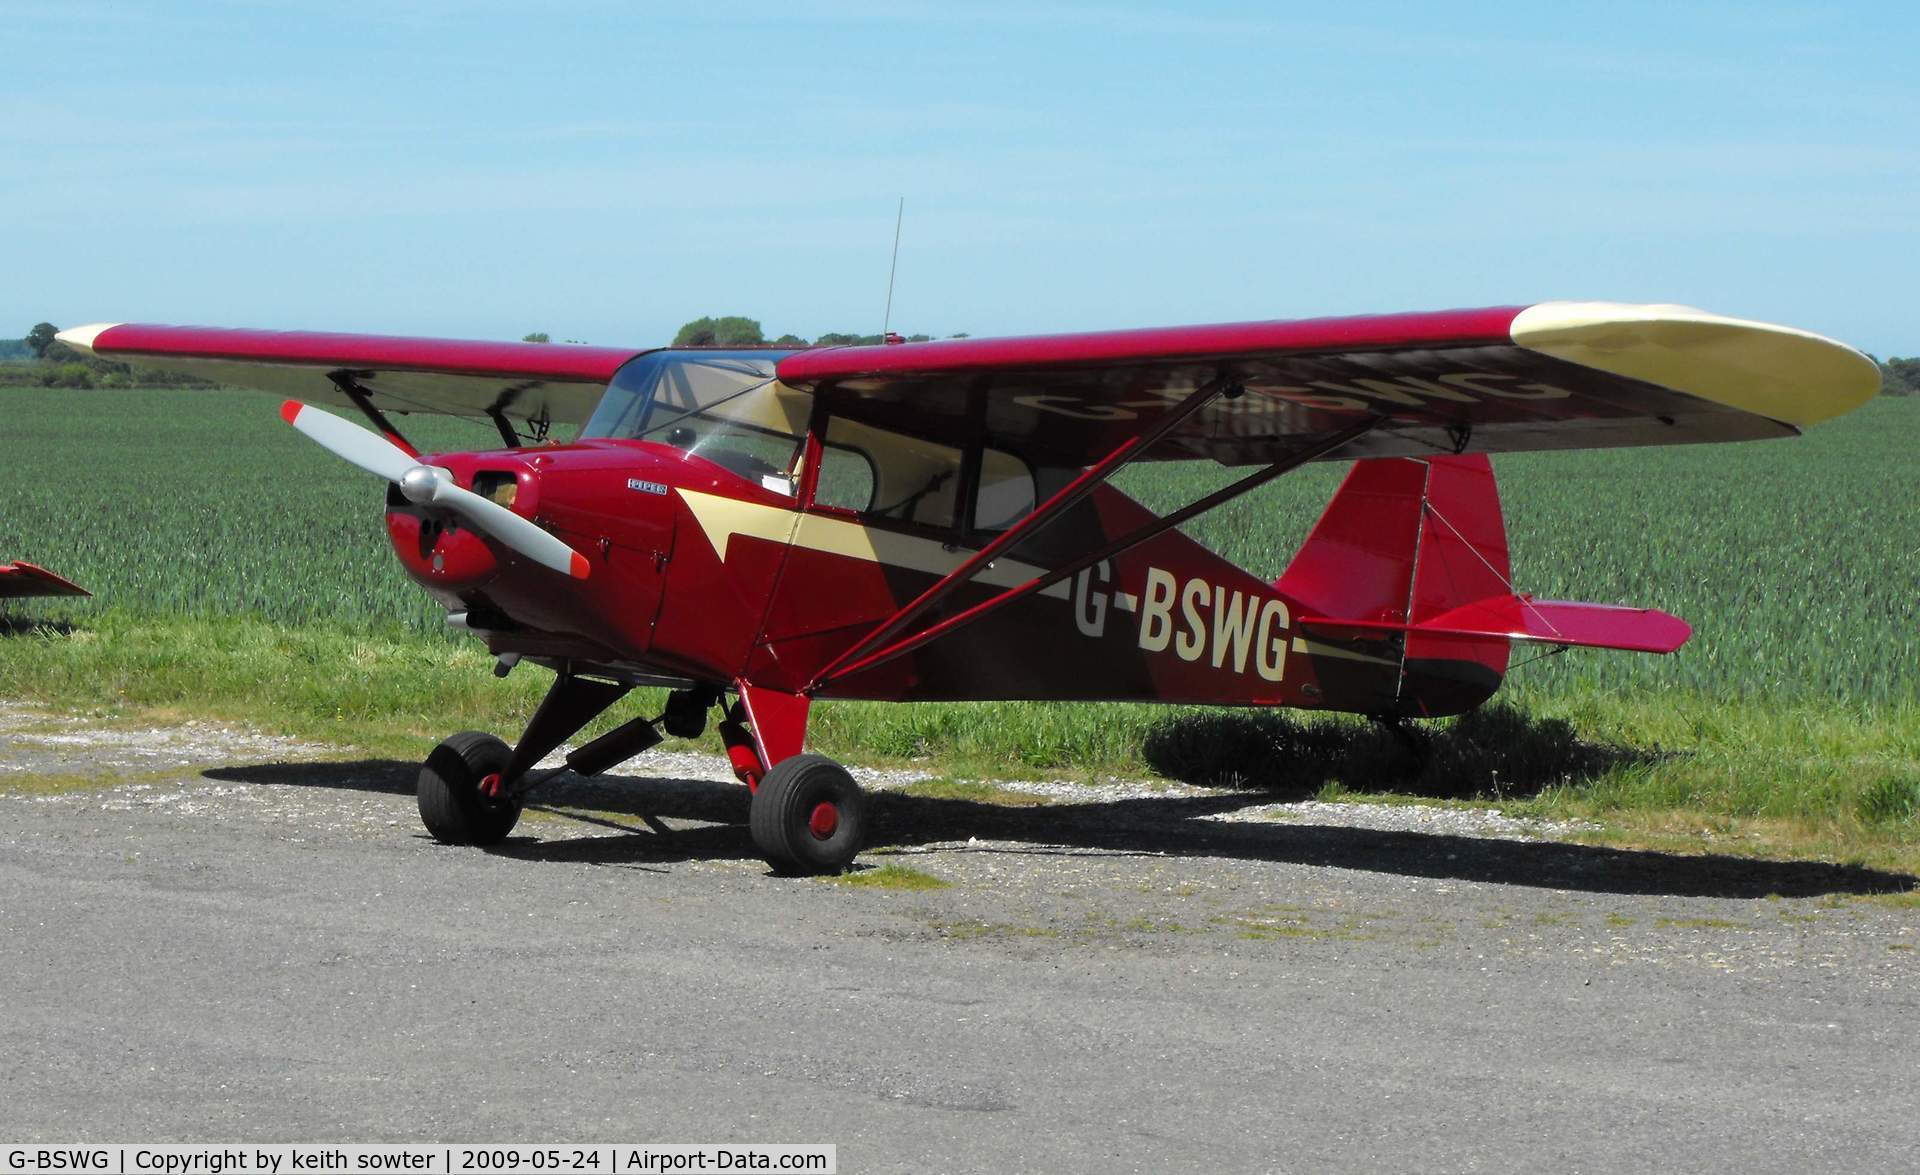 G-BSWG, 1946 Piper PA-17 Vagabond C/N 15-99, Visiting aircraft at Little Snoring Fly-In